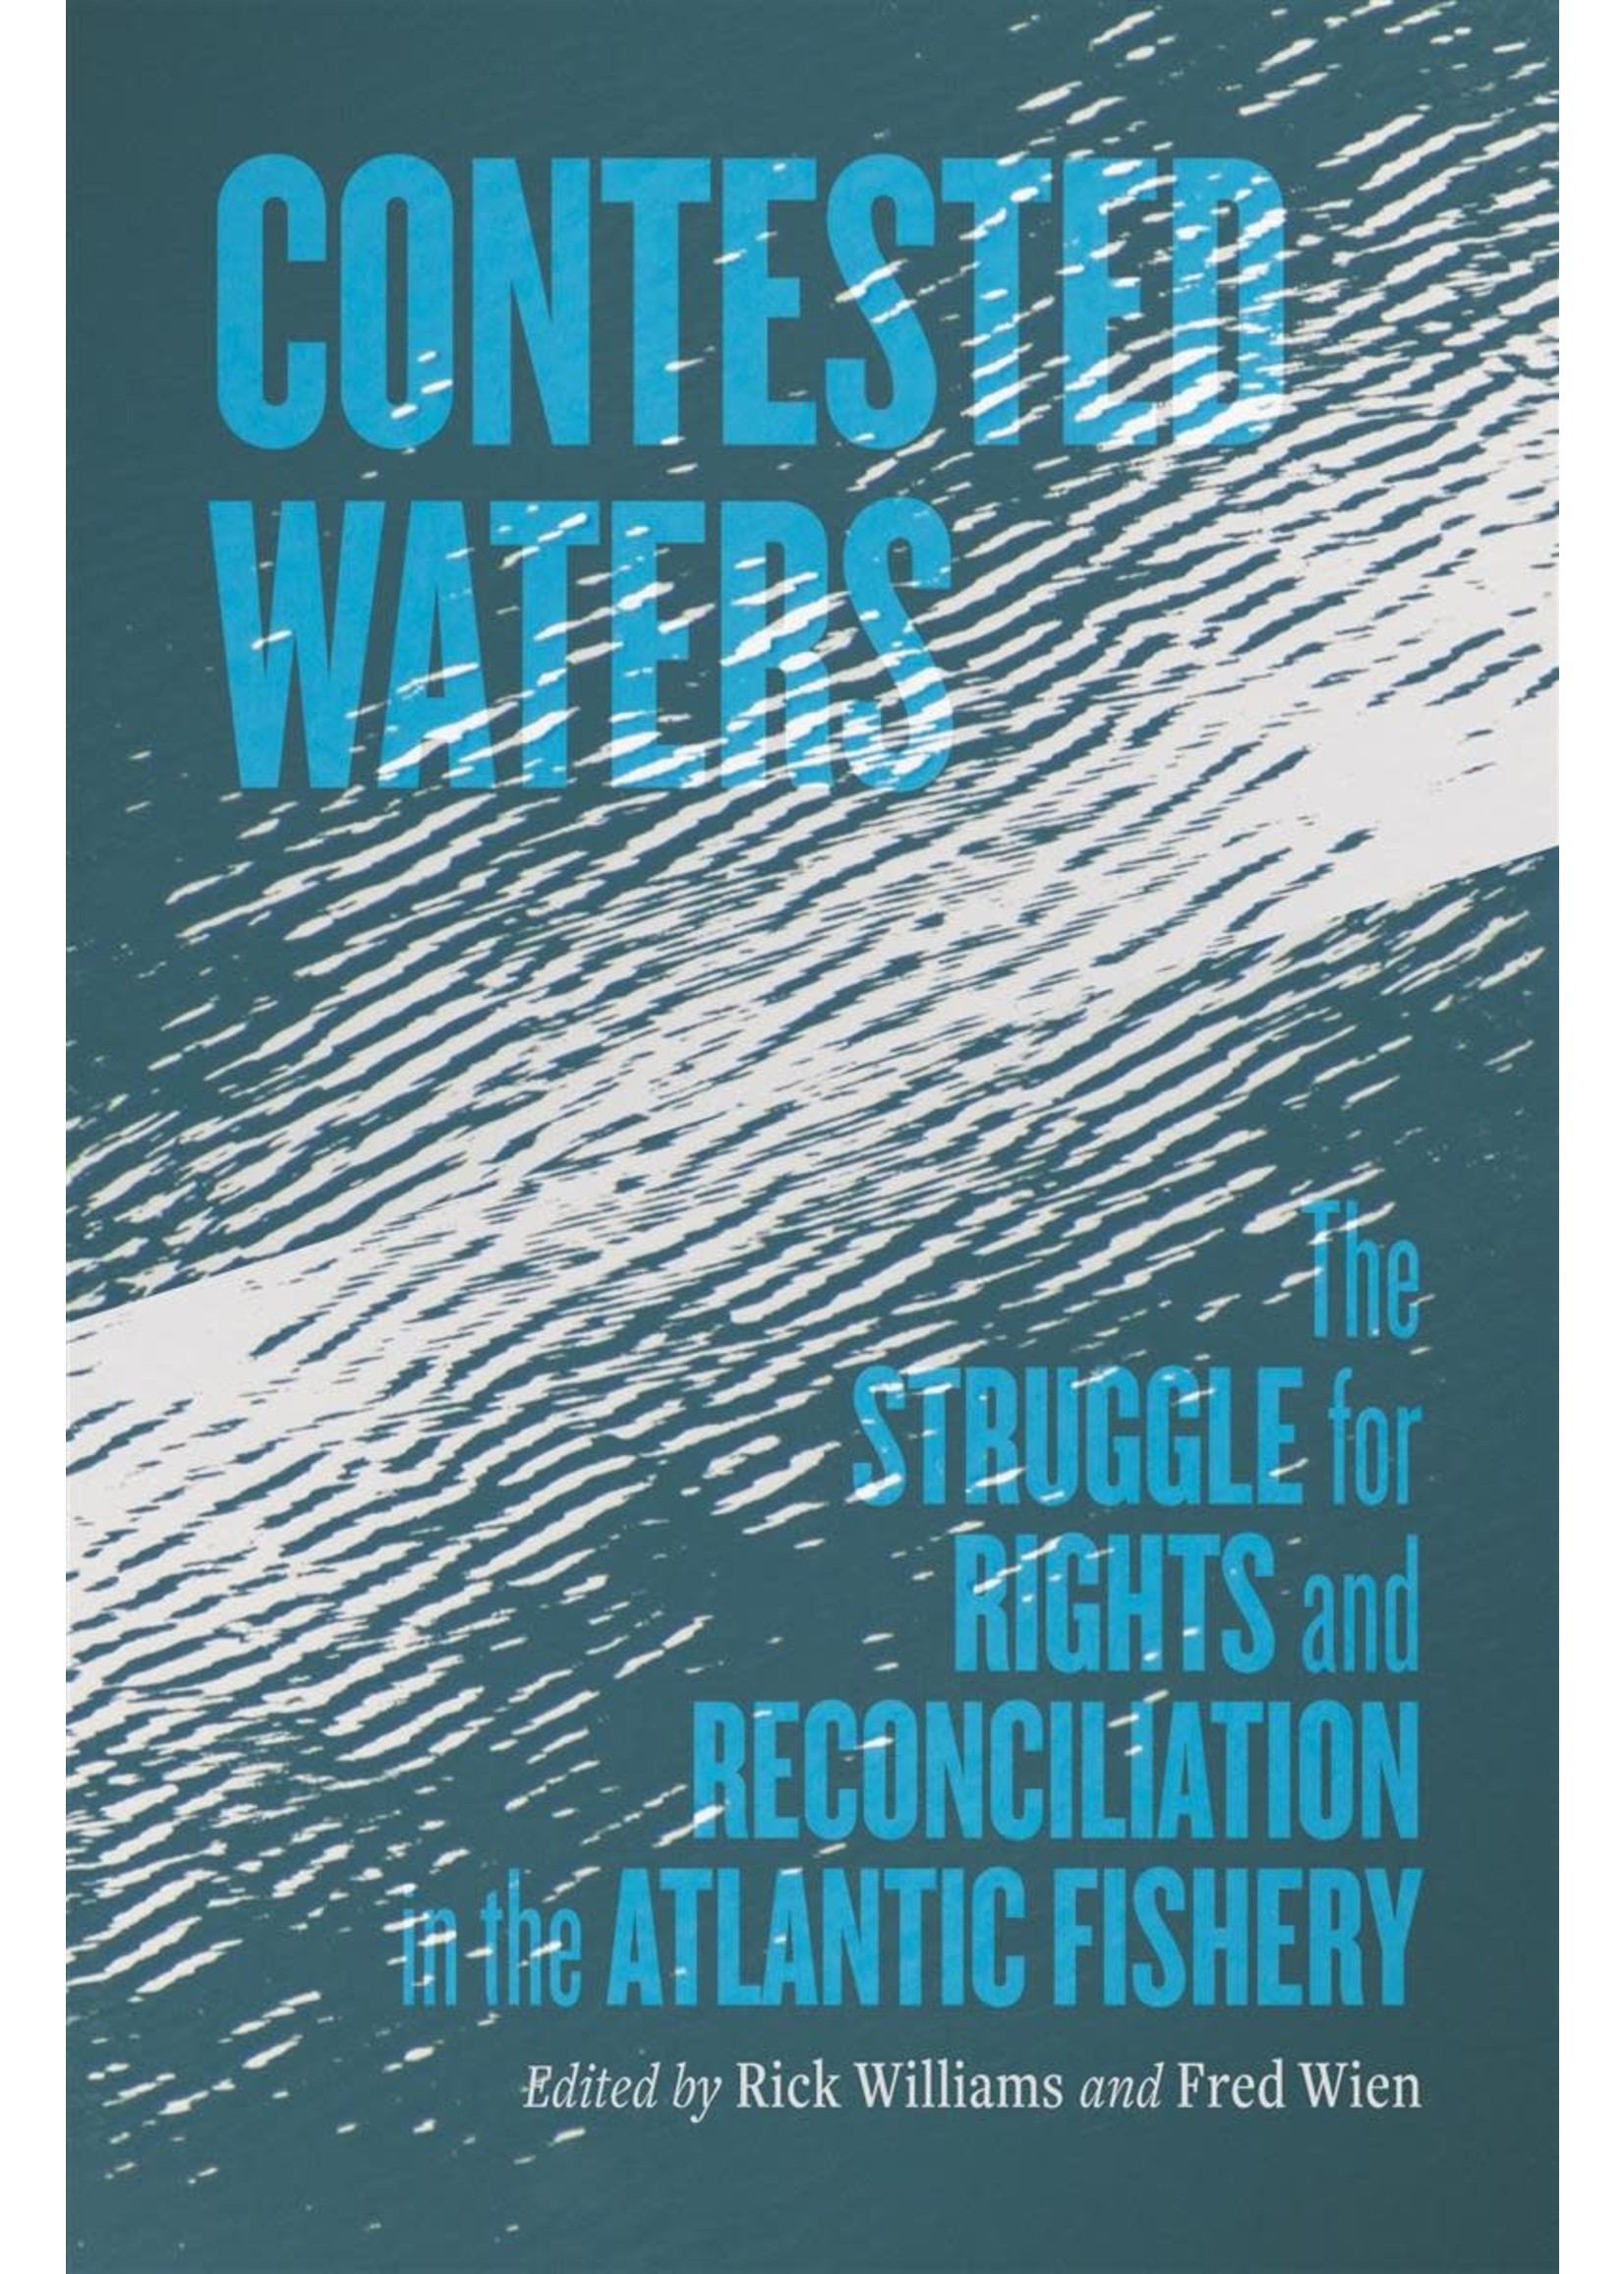 Contested Waters: The Struggle for Rights and Reconciliation in the Atlantic Fishery by Richard Williams, Fred Wien